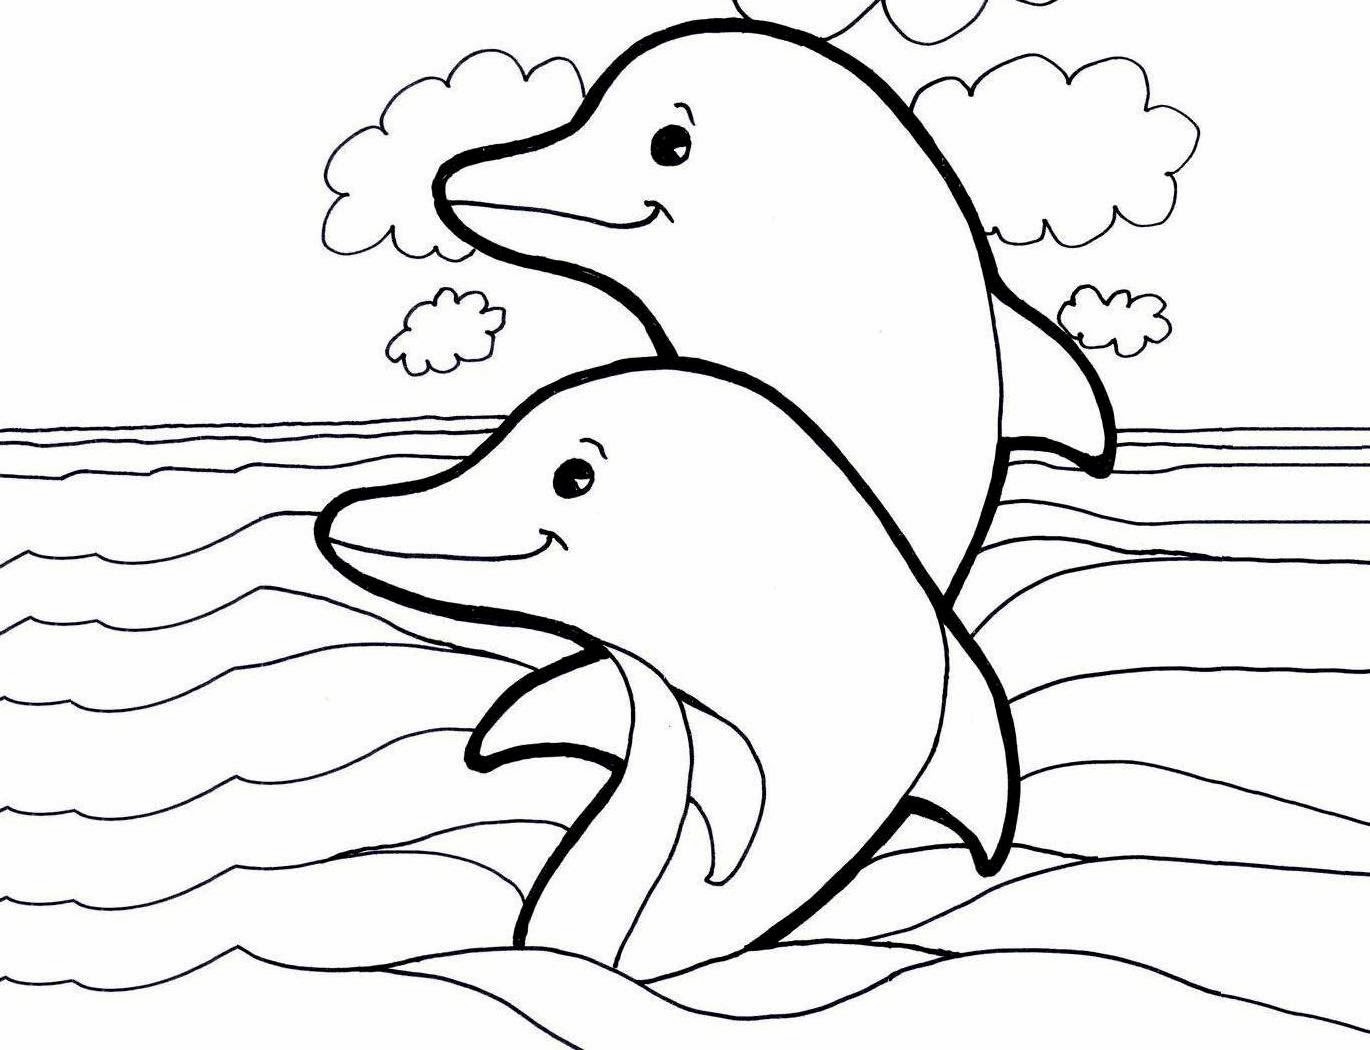 Free Dolphin Drawing Pictures, Download Free Dolphin Drawing Pictures